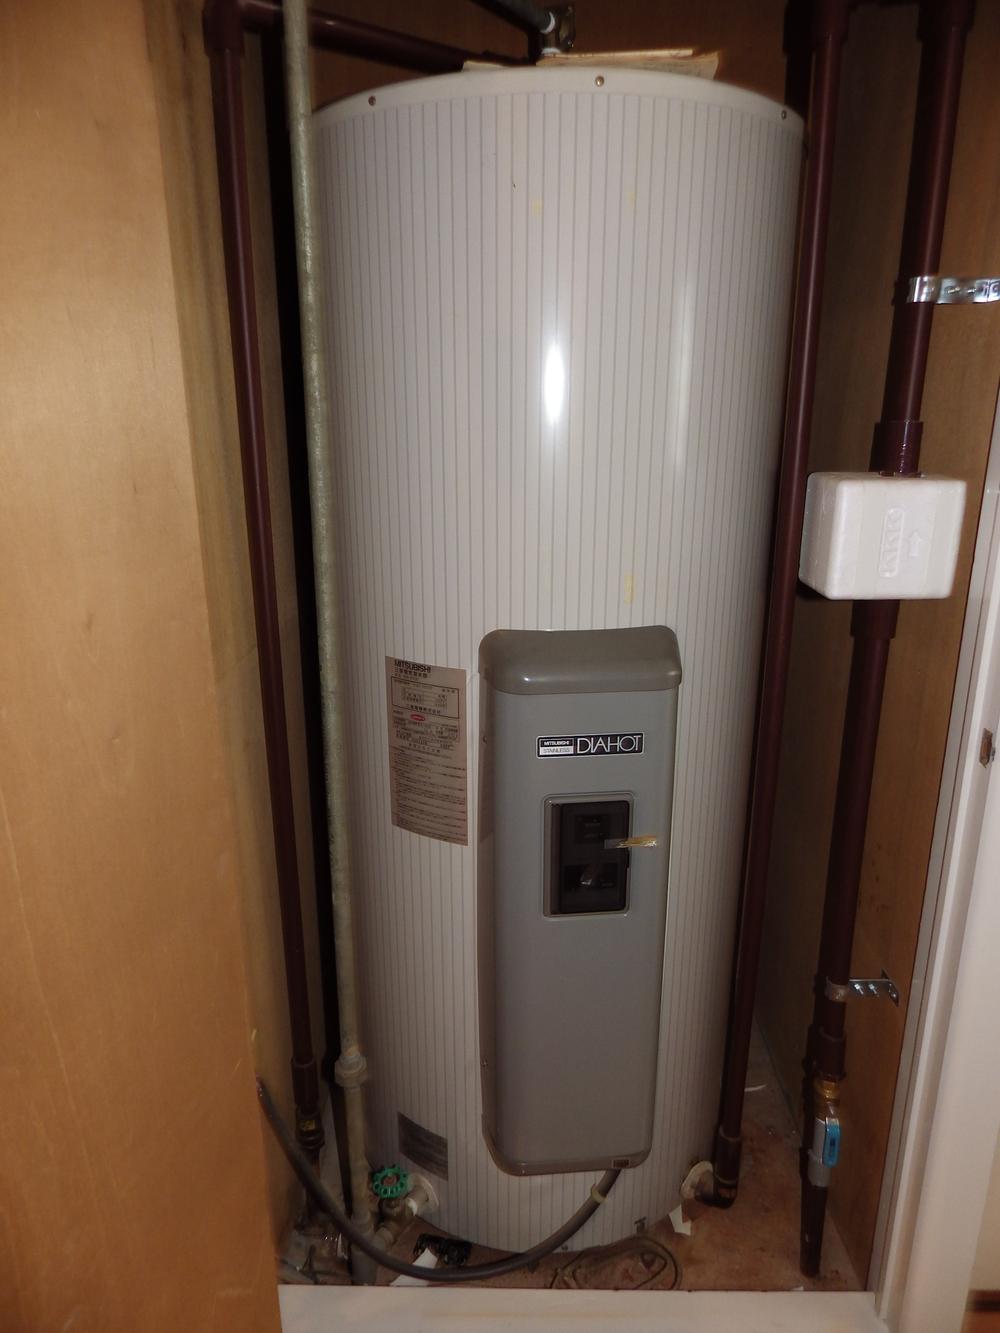 Other. Energy saving in the electric hot water water heater!